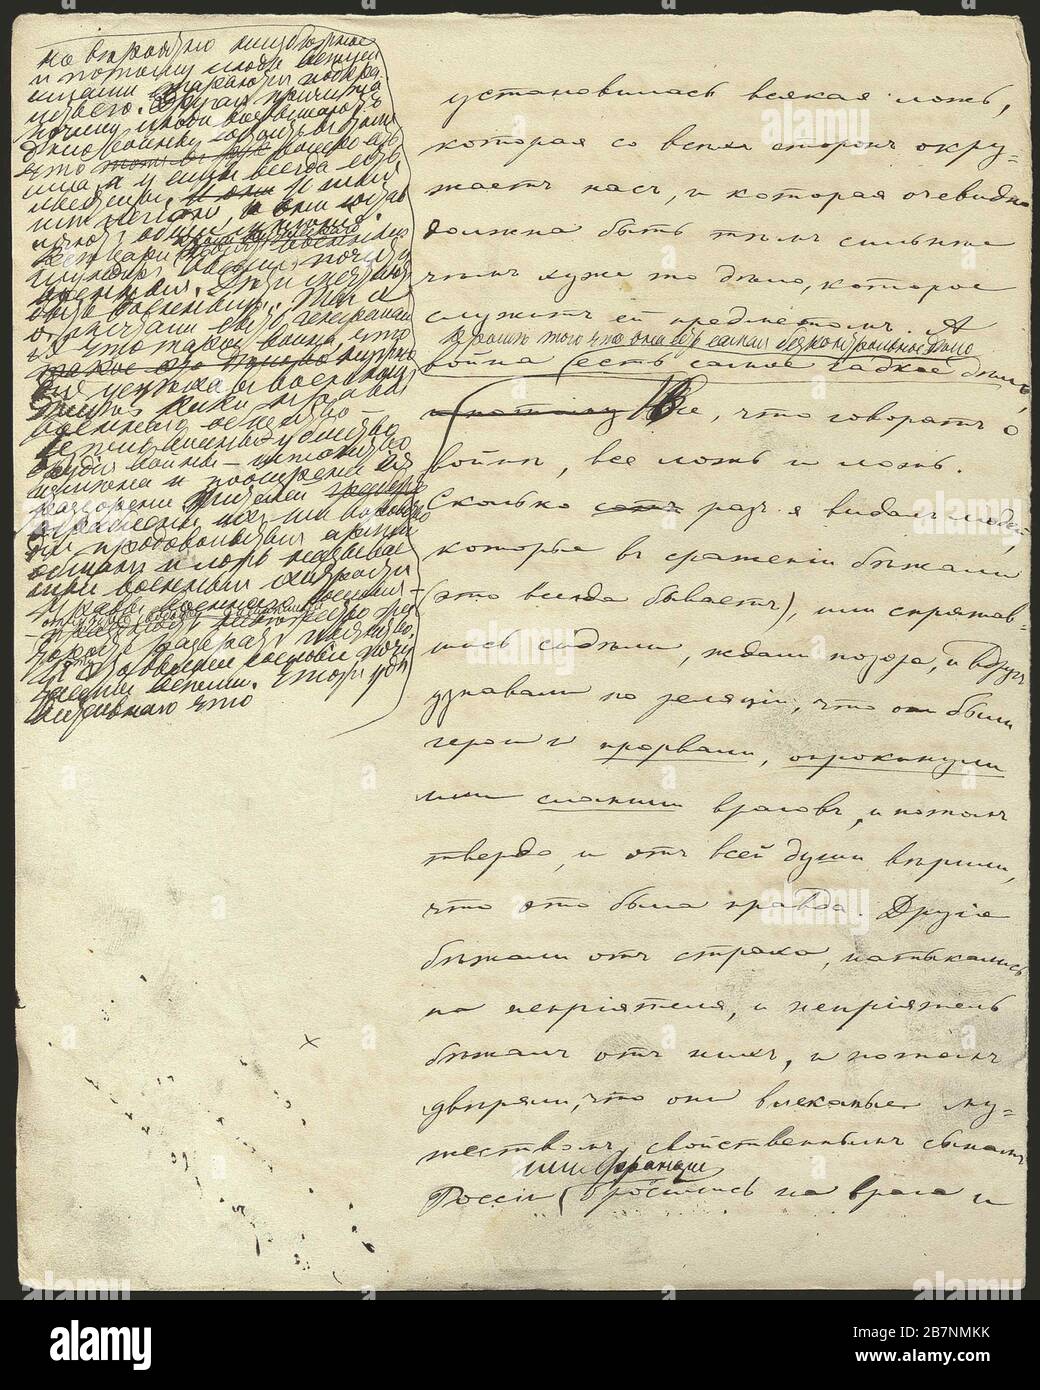 War and Peace, Book III, Part 2, Chap. 25, autograph manuscript, 1865-1869. Found in the Collection of State Museum of Leo Tolstoy, Moscow. Stock Photo